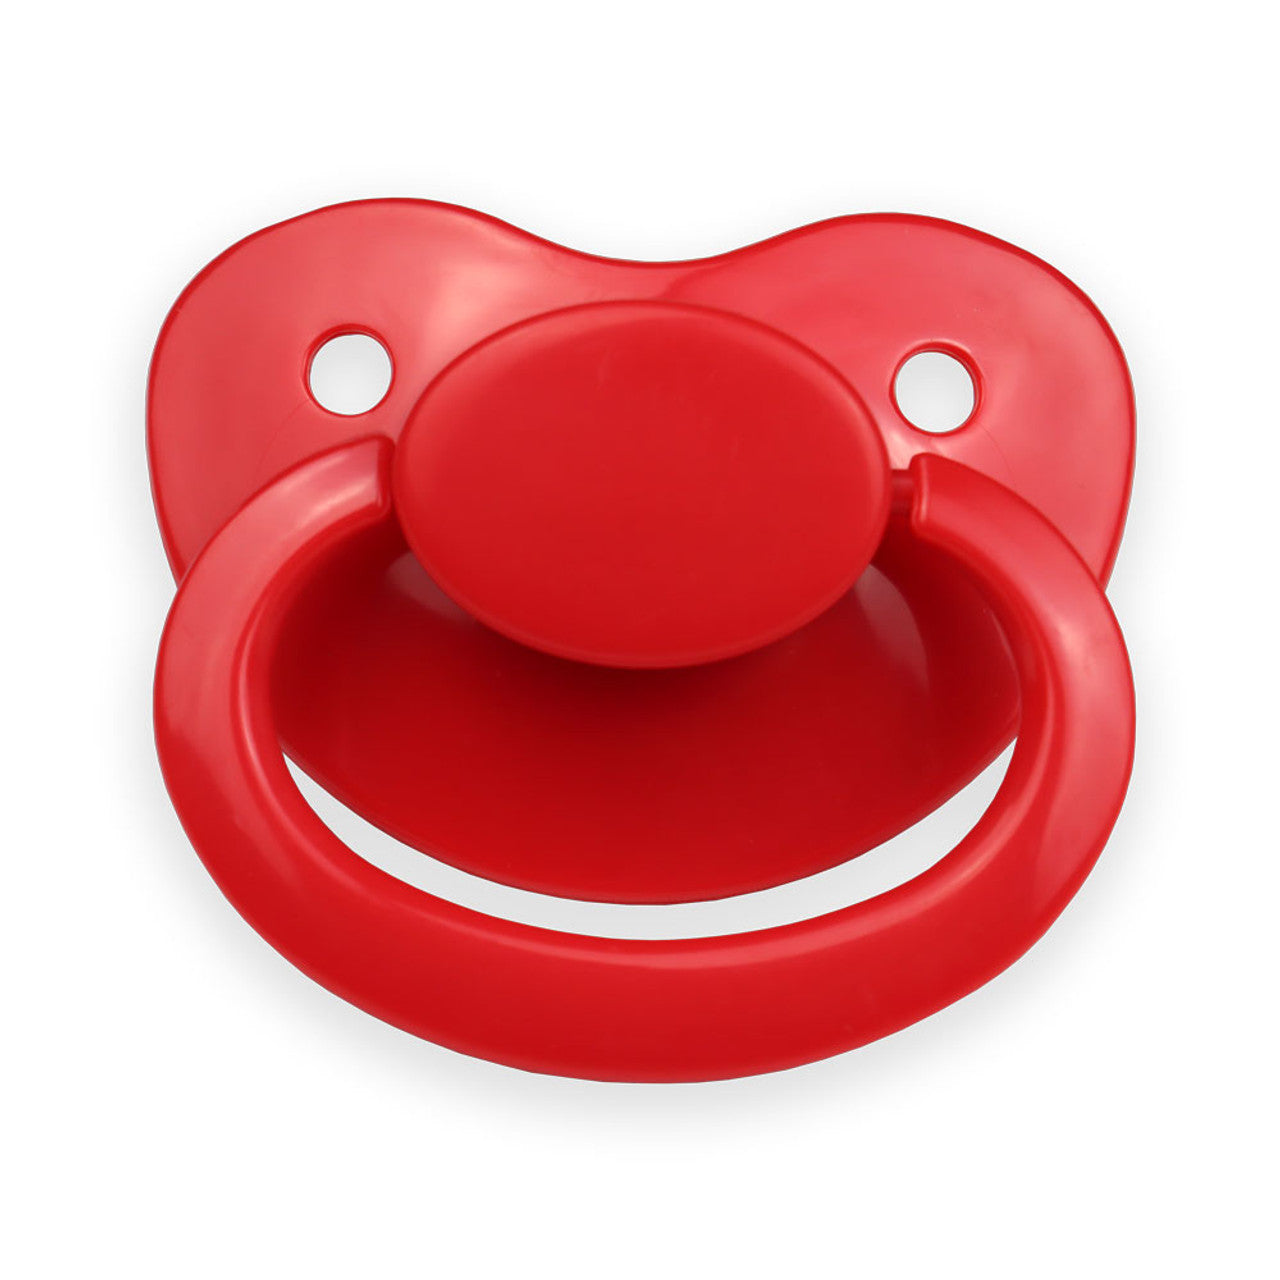 Adult Size 6 Pacifier red